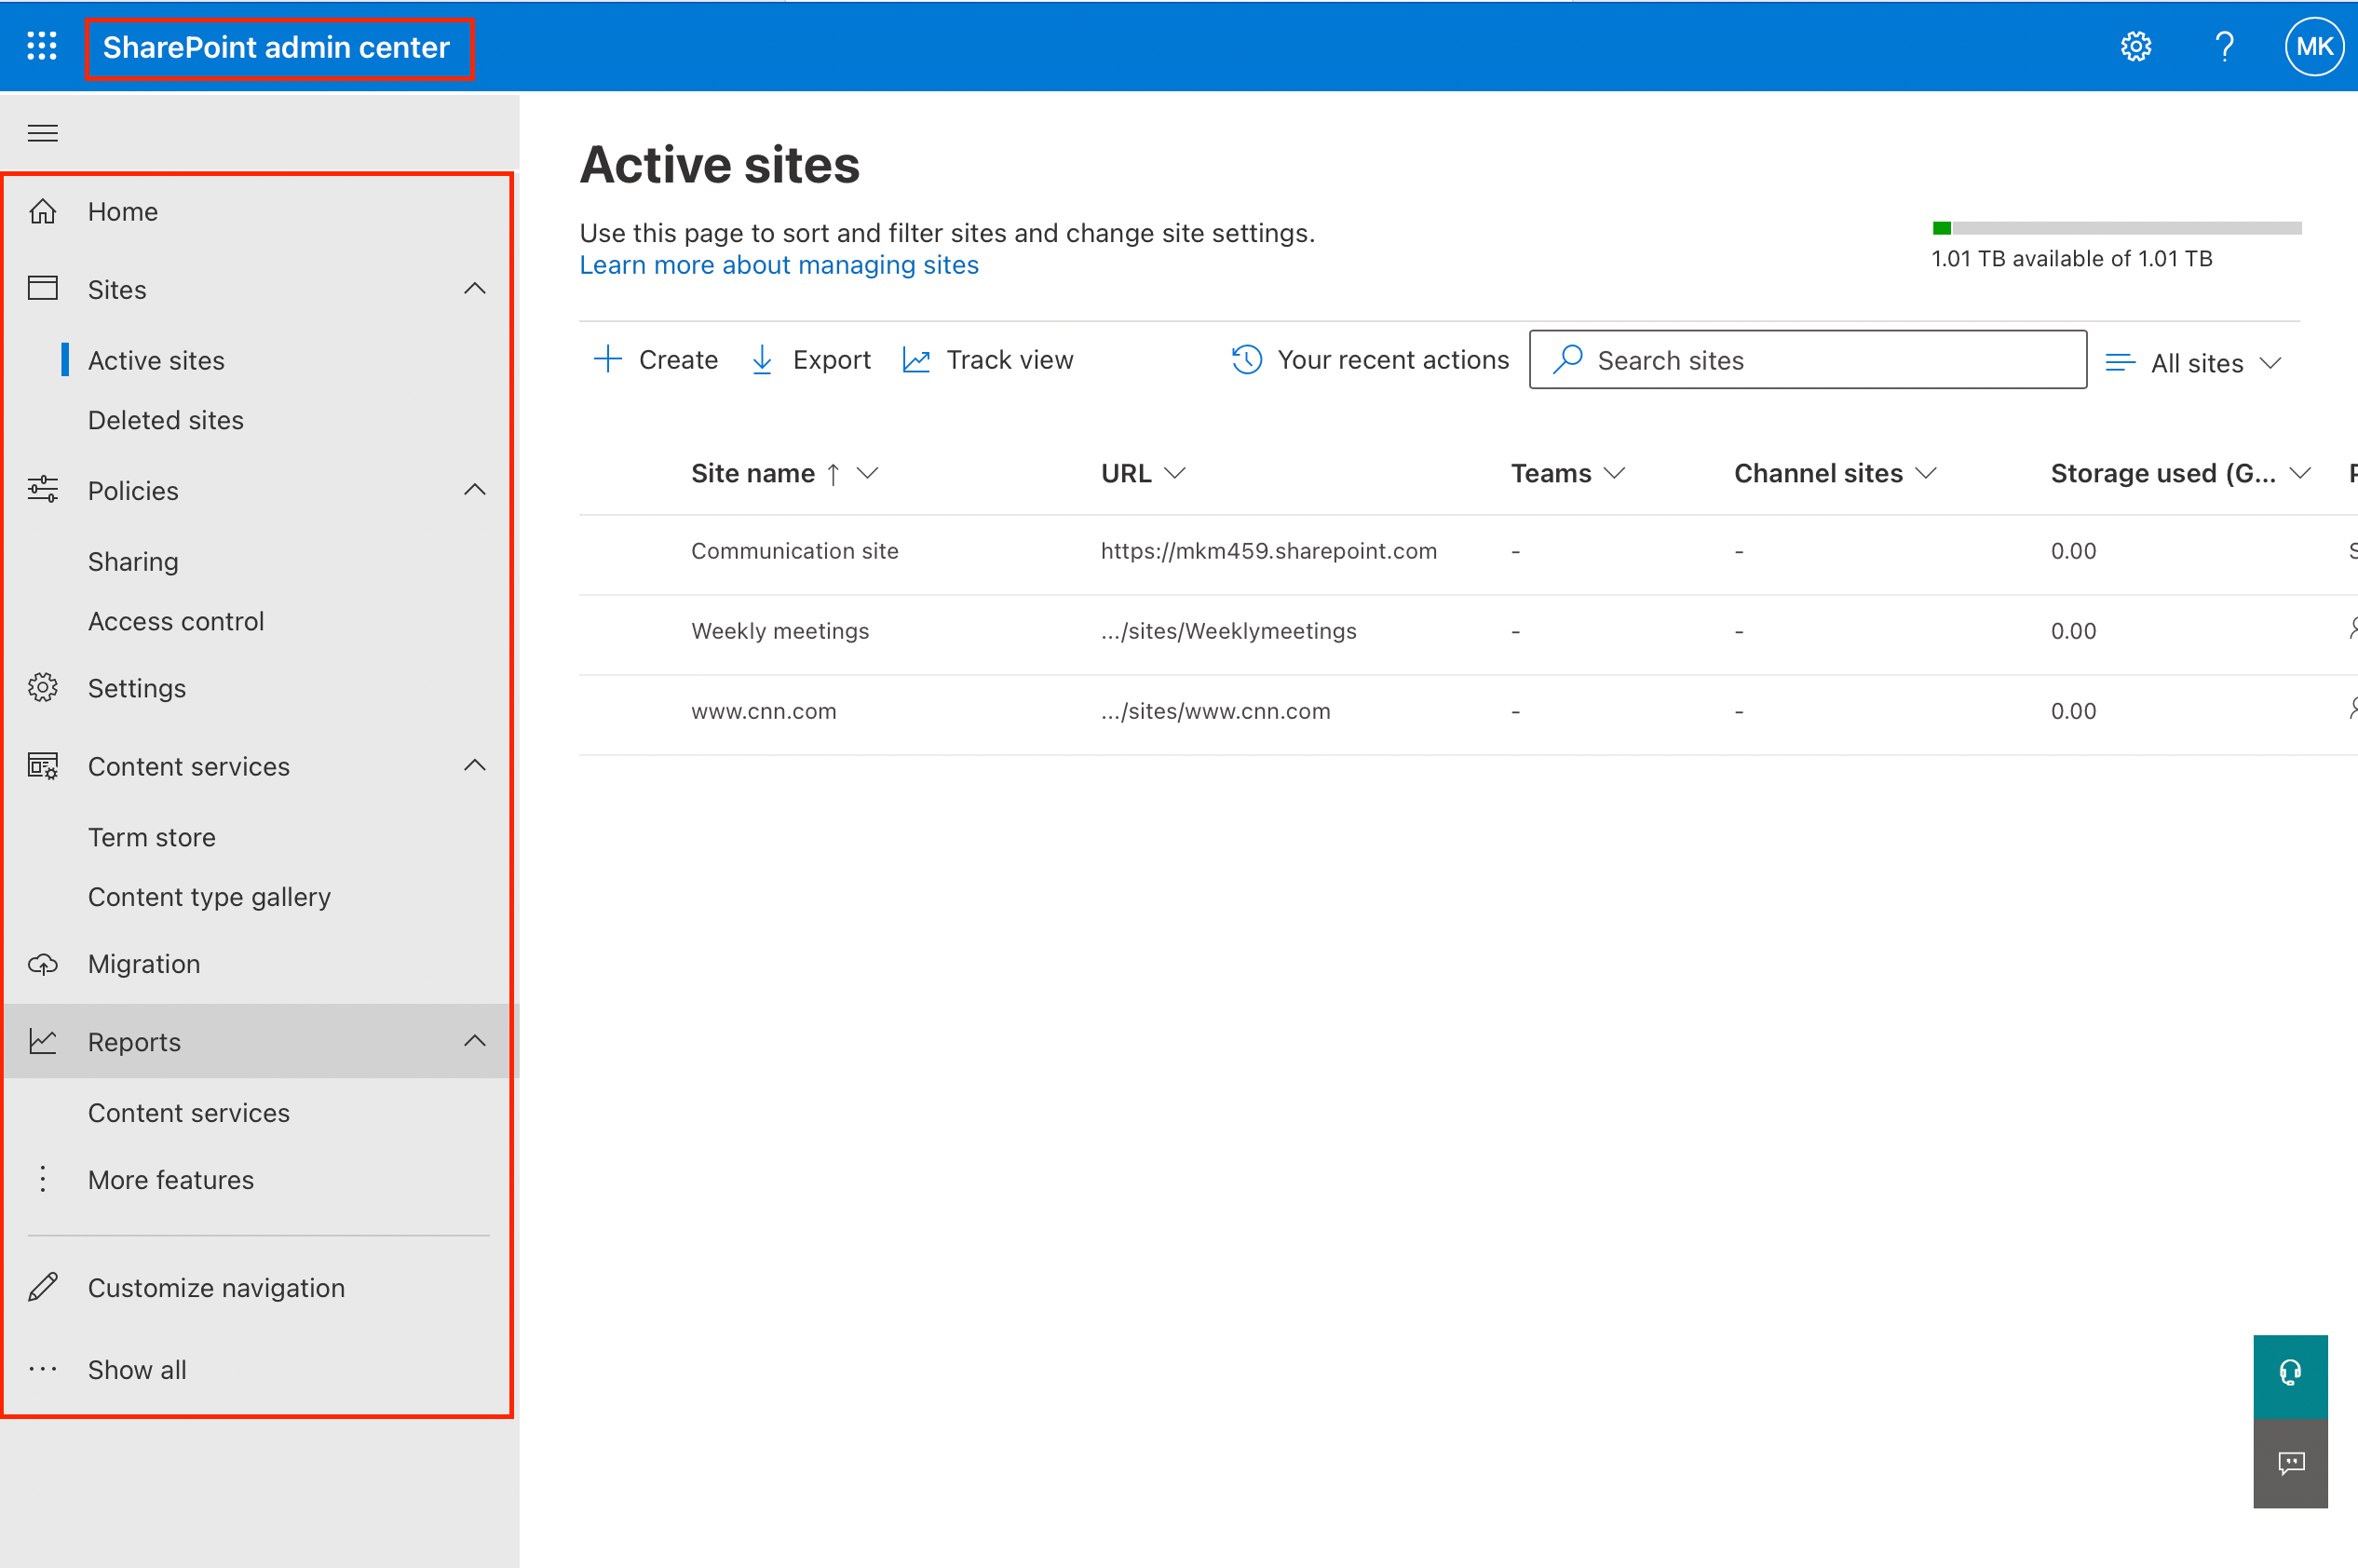 Go to the SharePoint Admin Center to manage document libraries and site collections